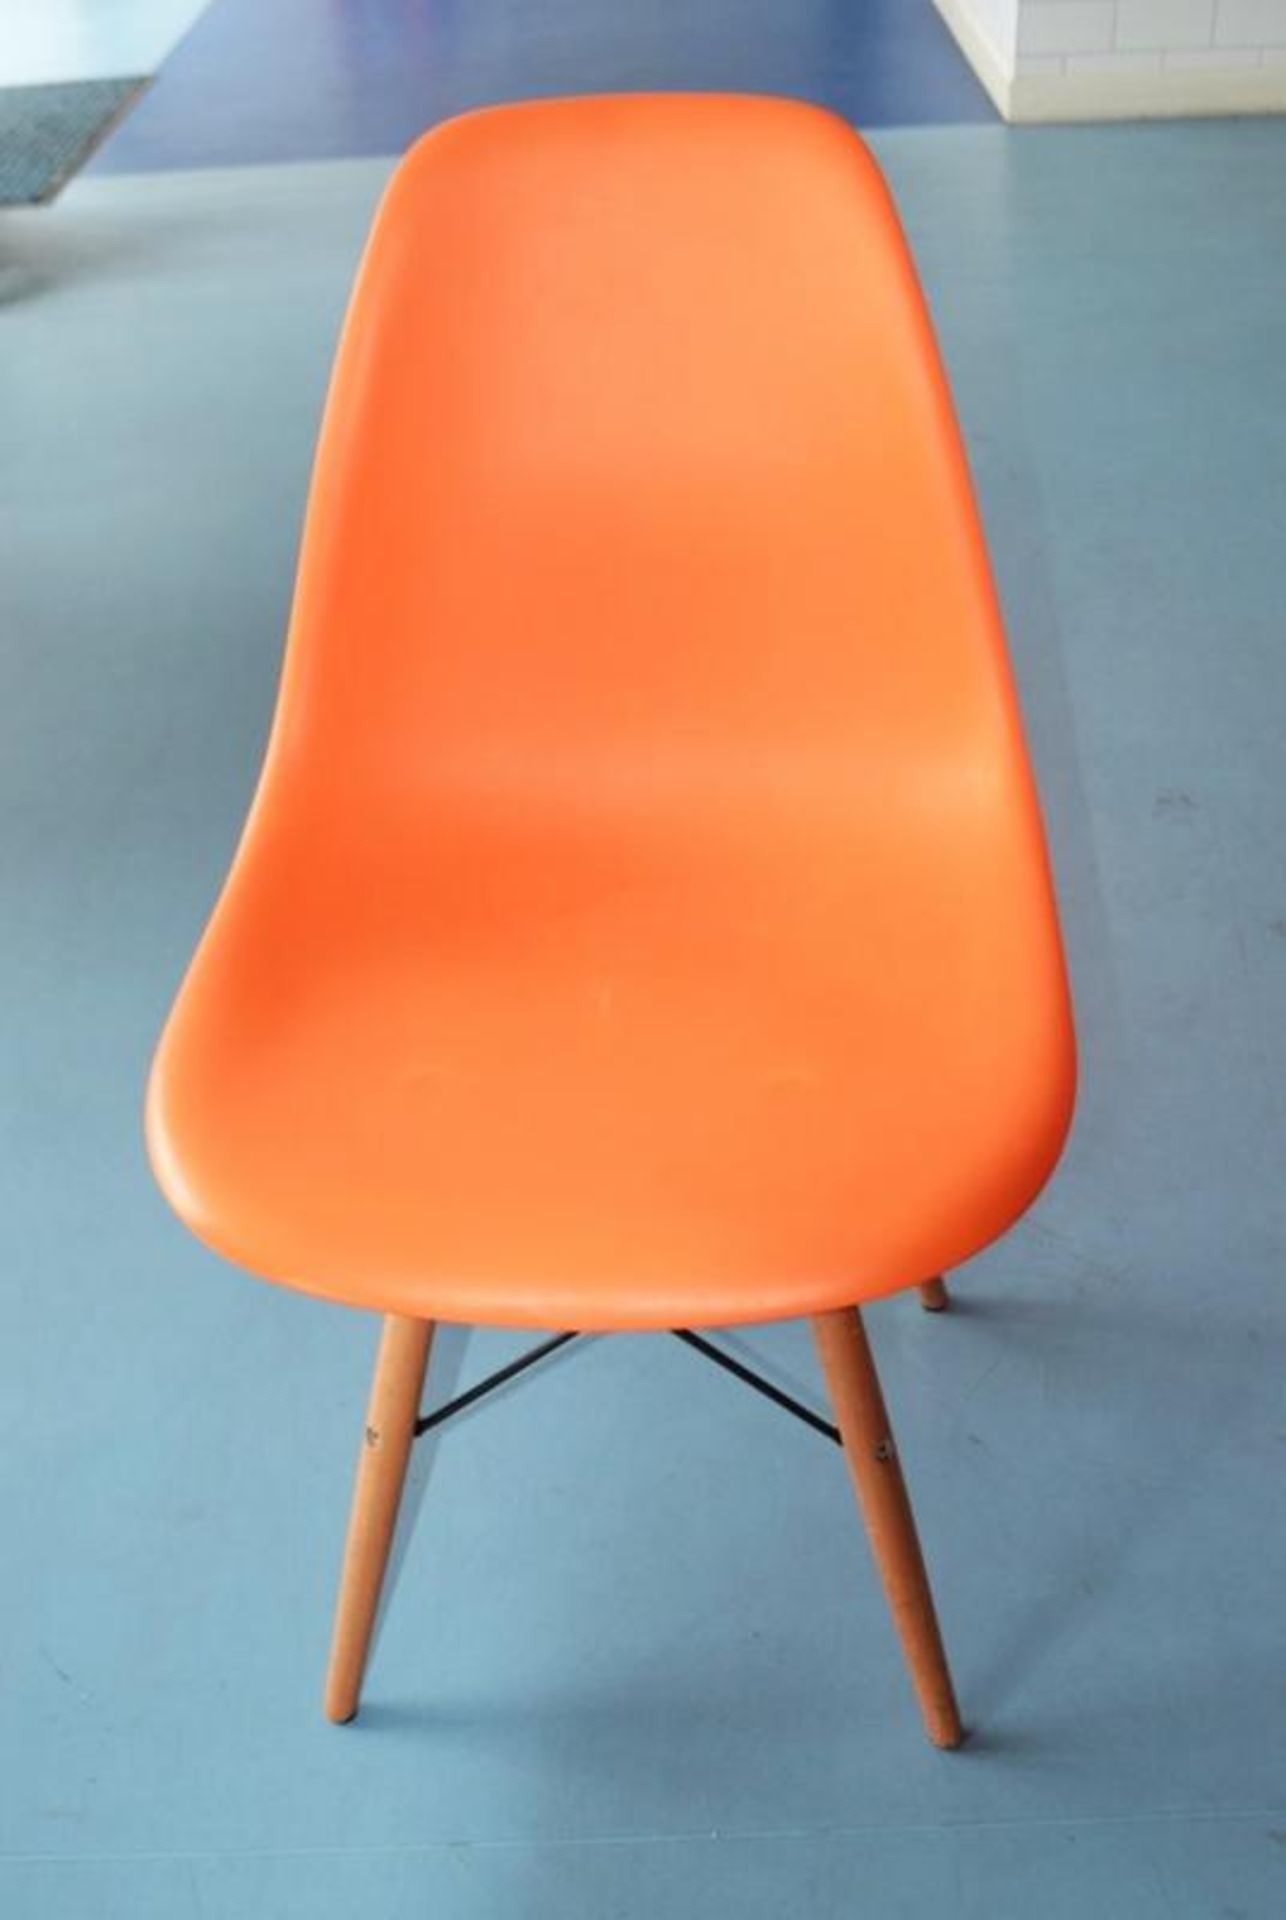 12 x Children's Orange and Red Charles and Ray Eames Style Shell Chairs - CL425 - Location: Altrinch - Image 2 of 9